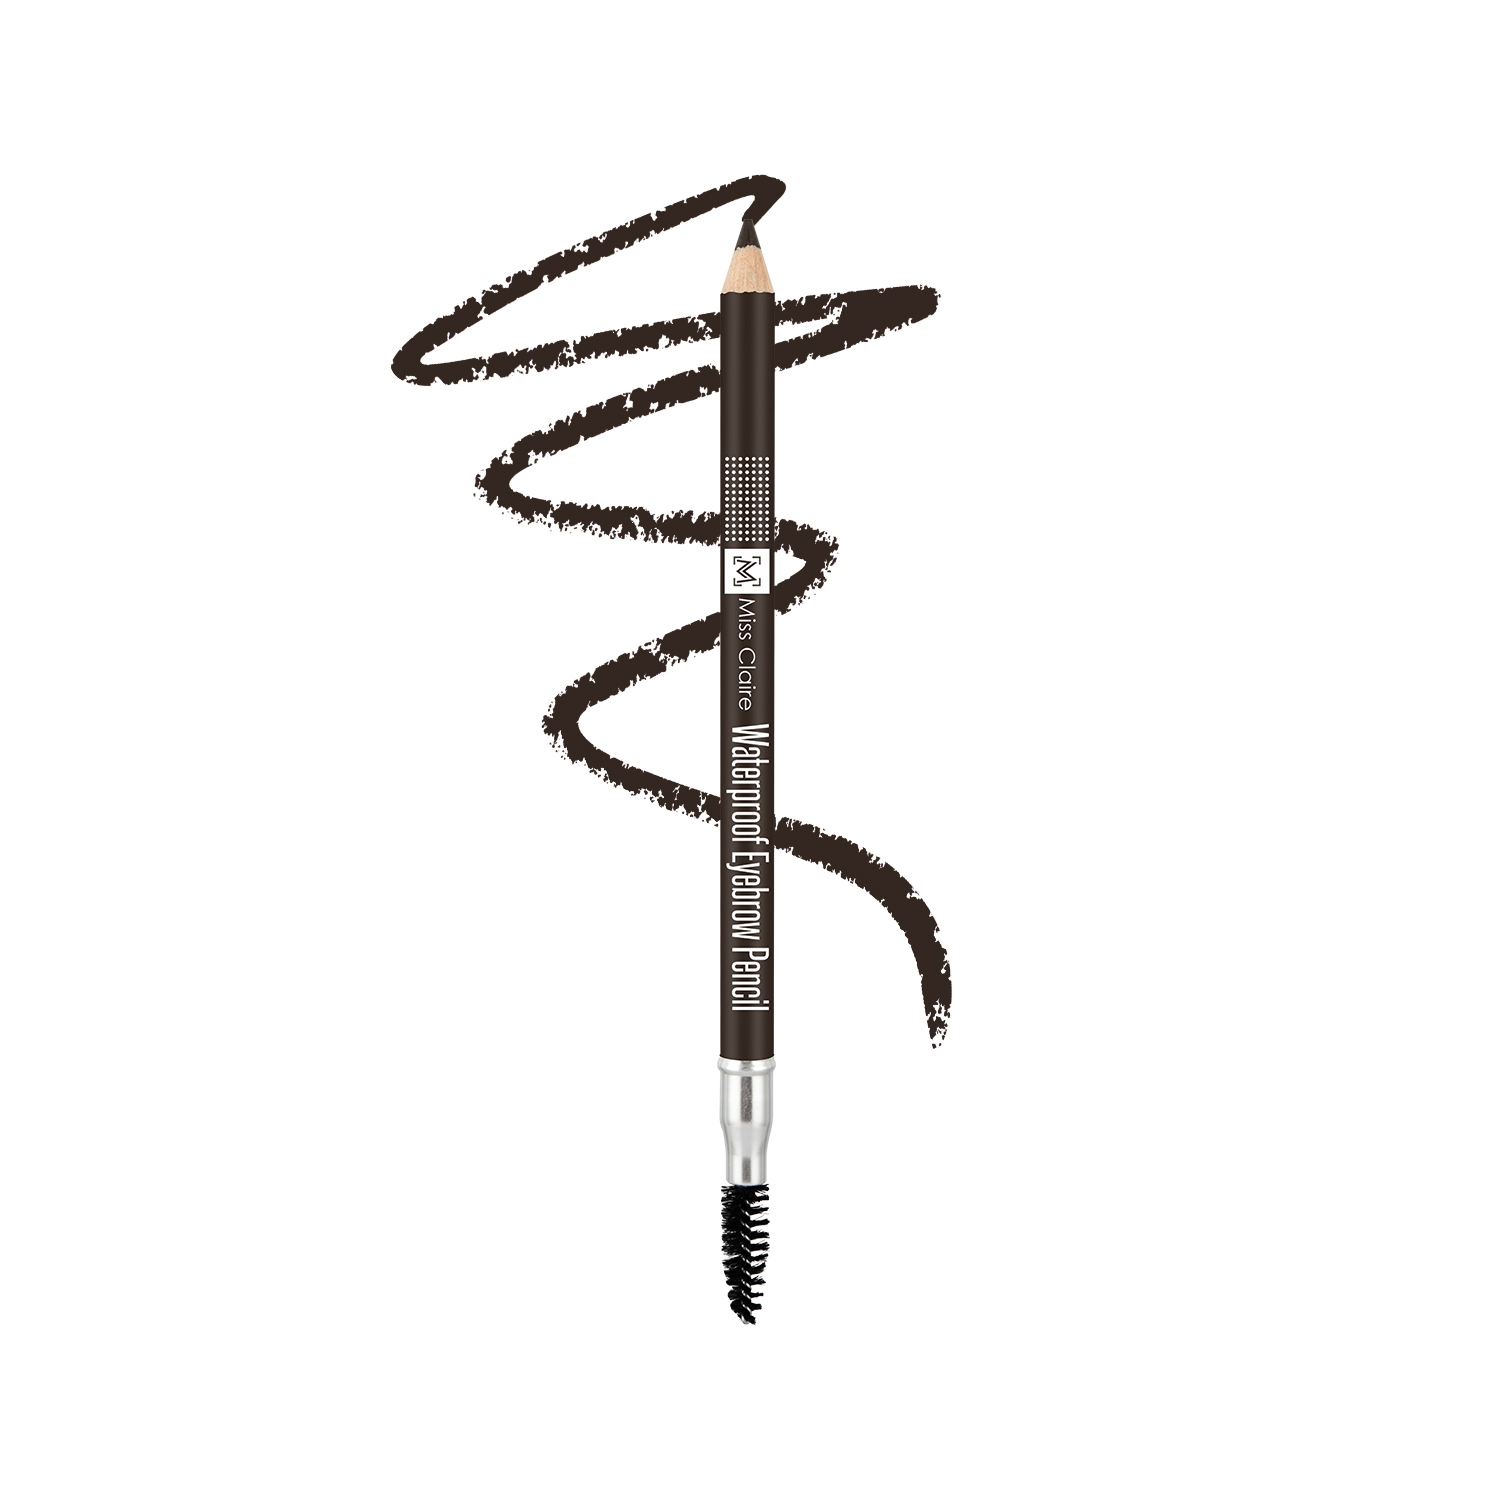 Miss Claire | Miss Claire Waterproof Eyebrow Pencil With Mascara Brush - 02 Dark Brown (1.4g)